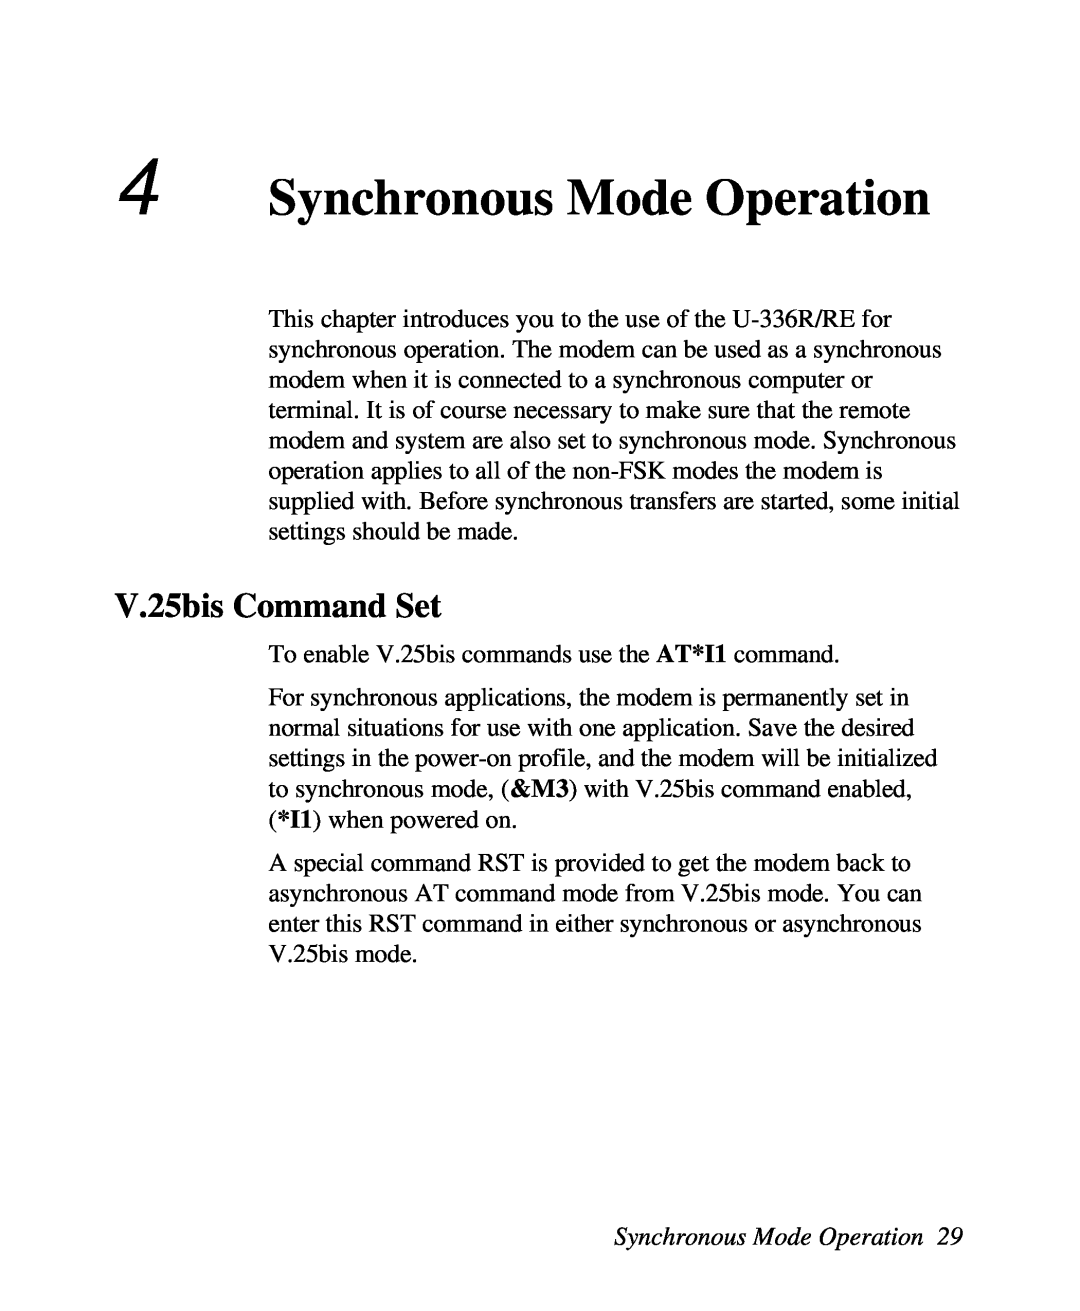 ZyXEL Communications U-336R/RE manual Synchronous Mode Operation, V.25bis Command Set 